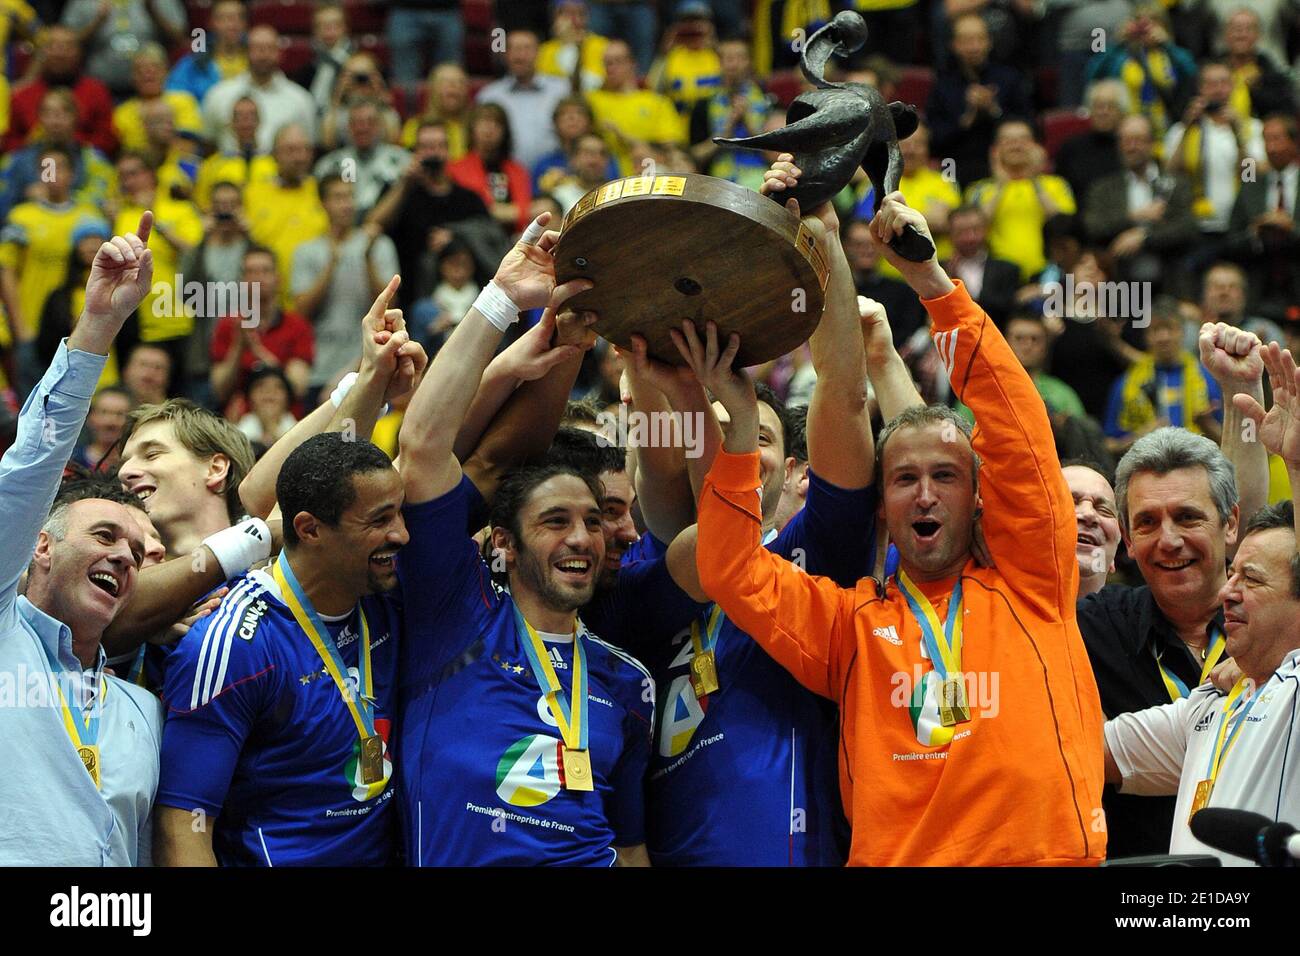 The team of France celebrate there gold medal with their trophy after the  Men's Handball World Championship final match between France and Danmark at  Malmo Arena in Malmo, Sweden on January 30,